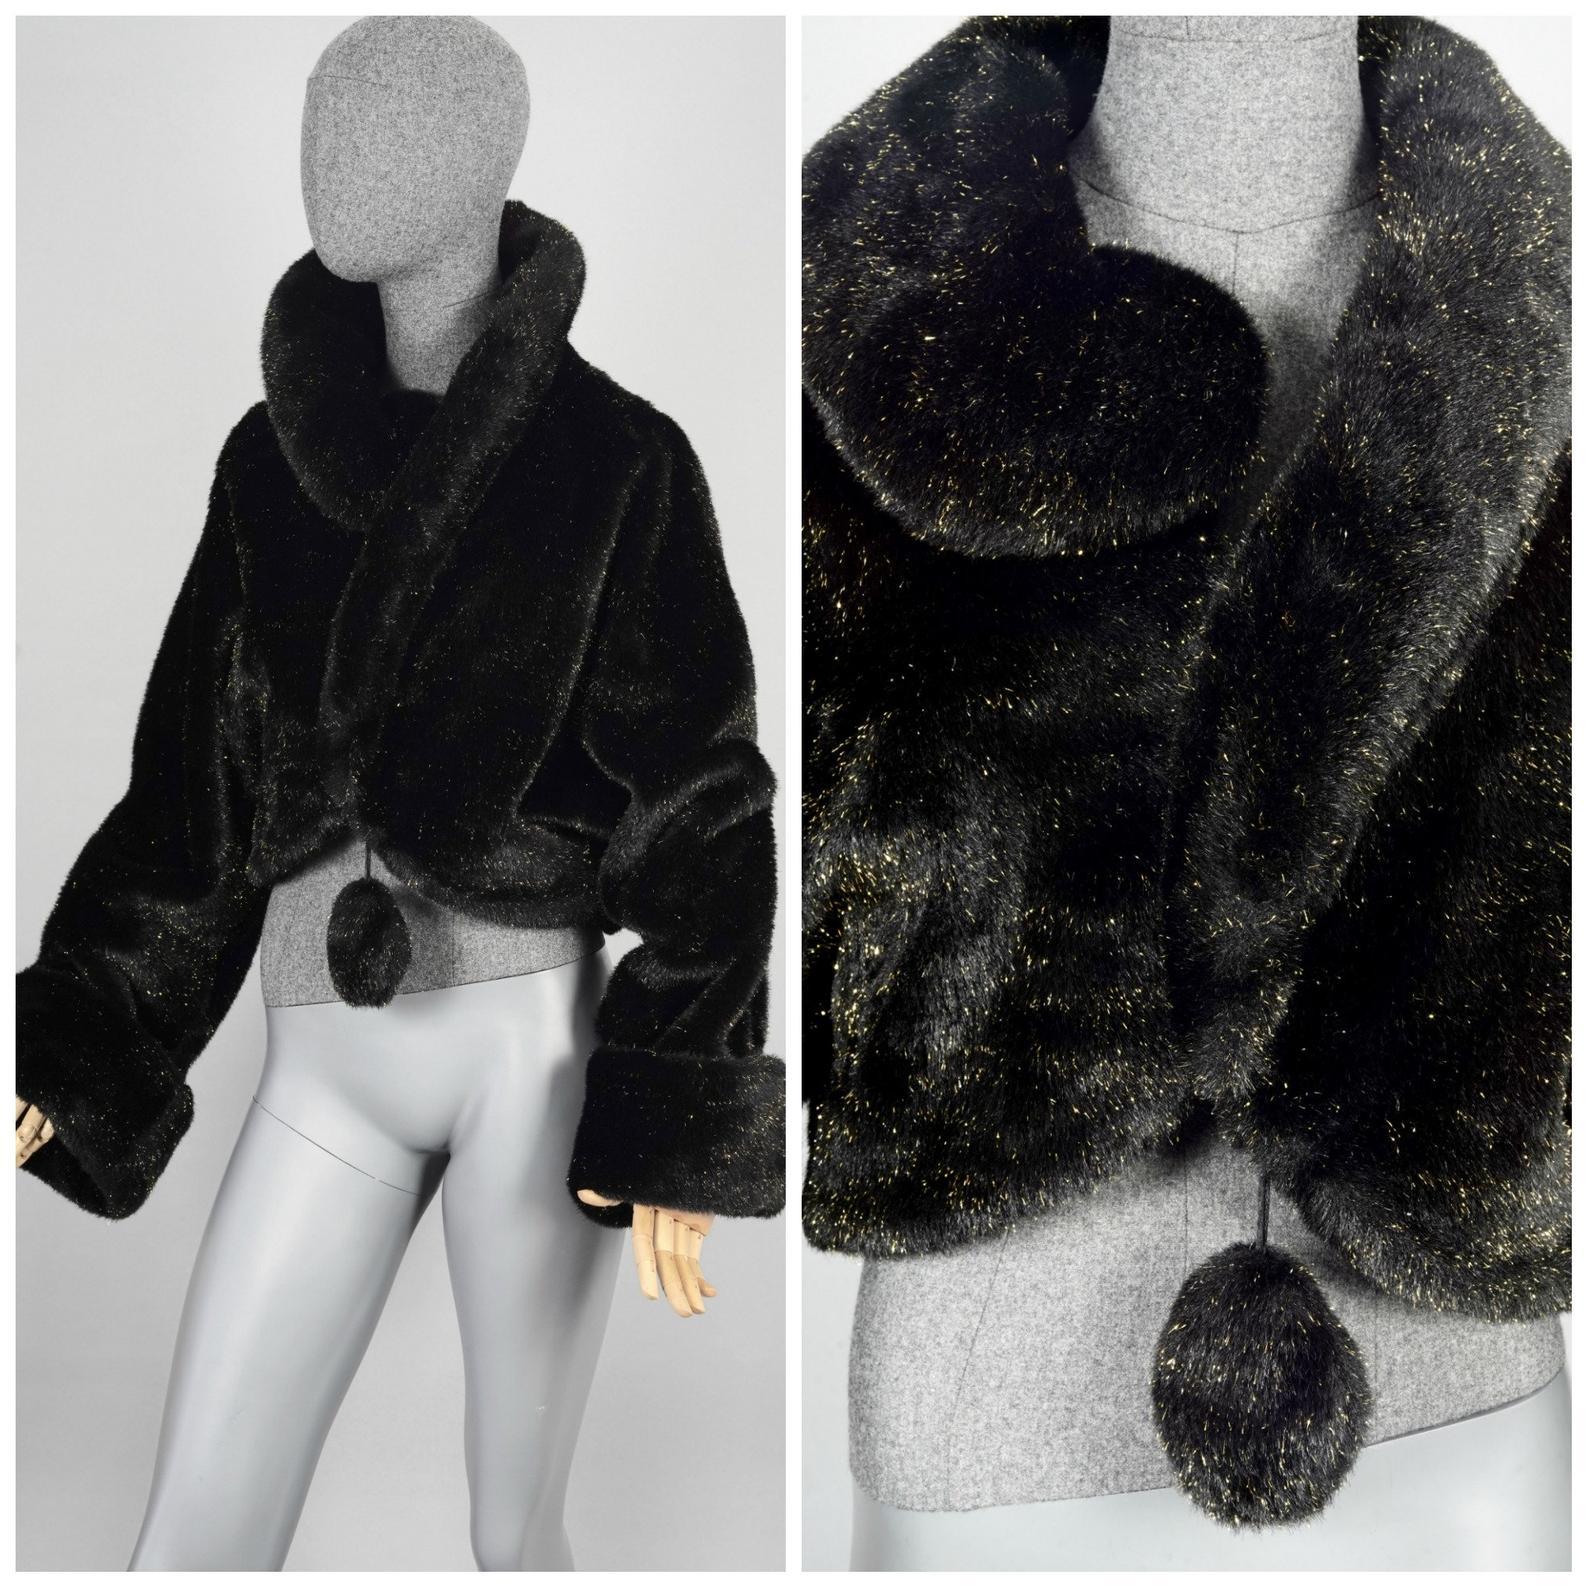 Vintage 1994 MOSCHINO Question Mark Shimmering Faux Fur Cropped Jacket

Measurements taken laid flat, please double bust and waist:
Raglan Sleeves: 30.31 inches  (77 cm)  from collar to cuff
Bust: 19.29 inches  (49 cm)
Waist: 17.71 inches  (45